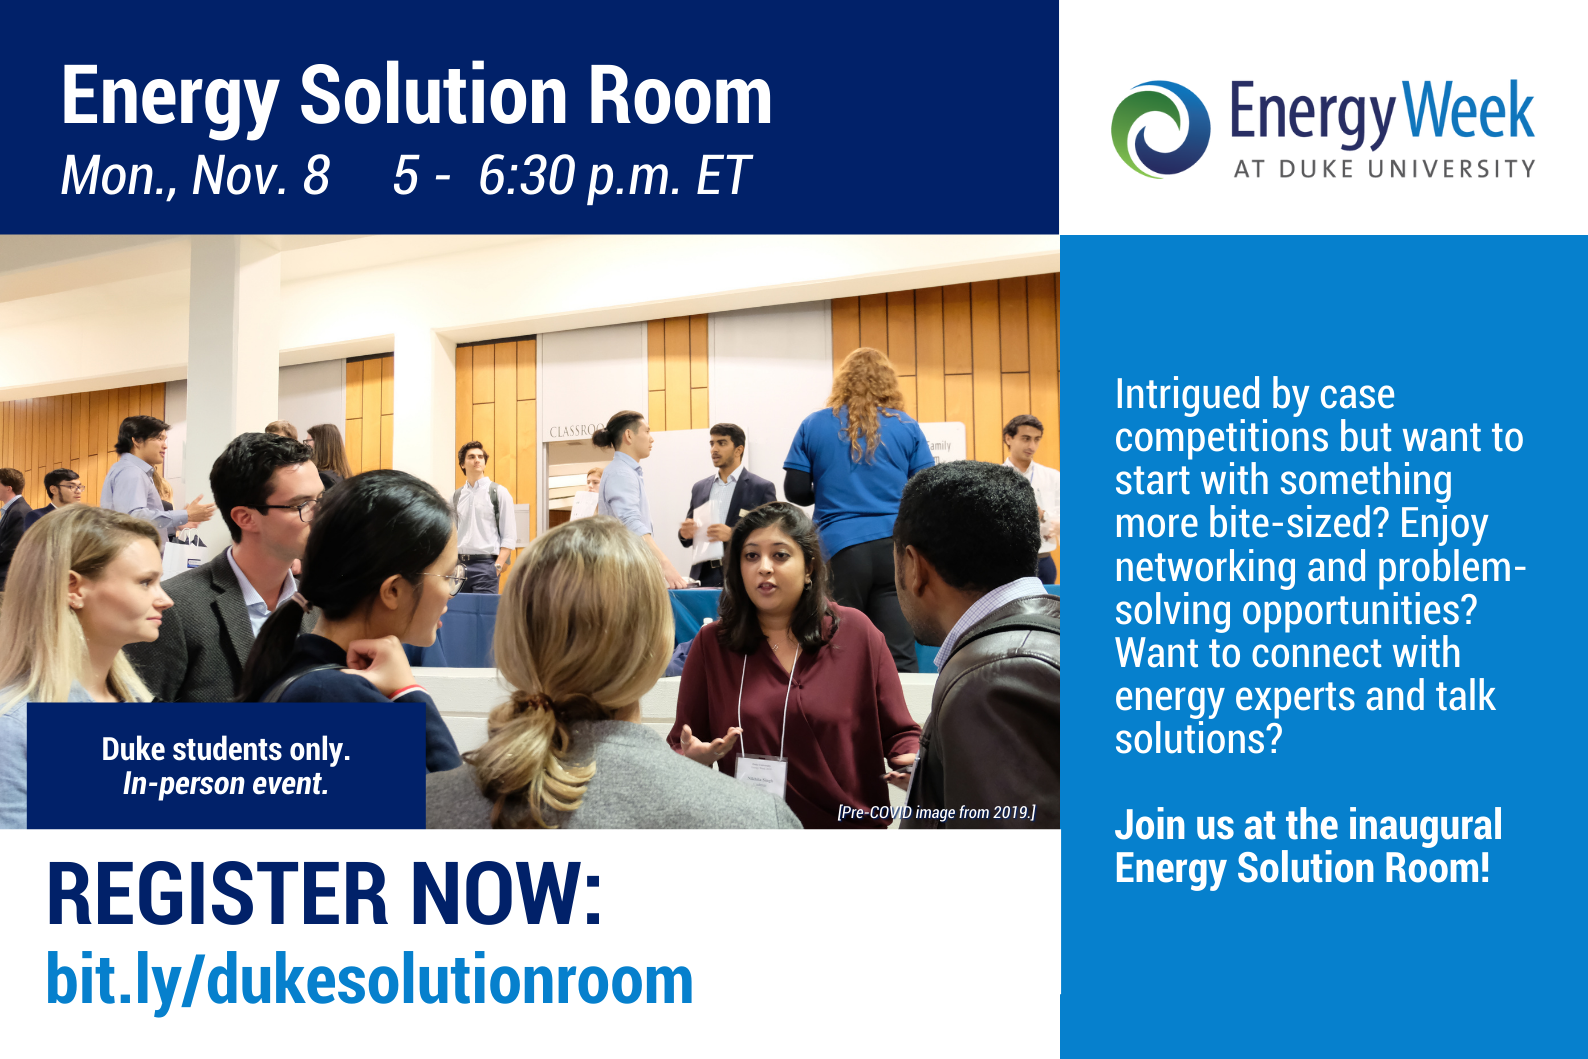 Title: Energy Solution Room Mon., Nov 8 5-6:30p.m. ET Image: Students in a group discussing in a lecture room. Logo: Energy Week at Duke University Text: Duke students only. In-person event. Register Now: bit.ly/dukesolutionroom Intrigued by case competitions but want to start with something more bite-sized? Enjoy networking and problem-solving opportunities? Want to connect with energy experts and talk solutions? Join us at the inaugural Energy Solution Room!